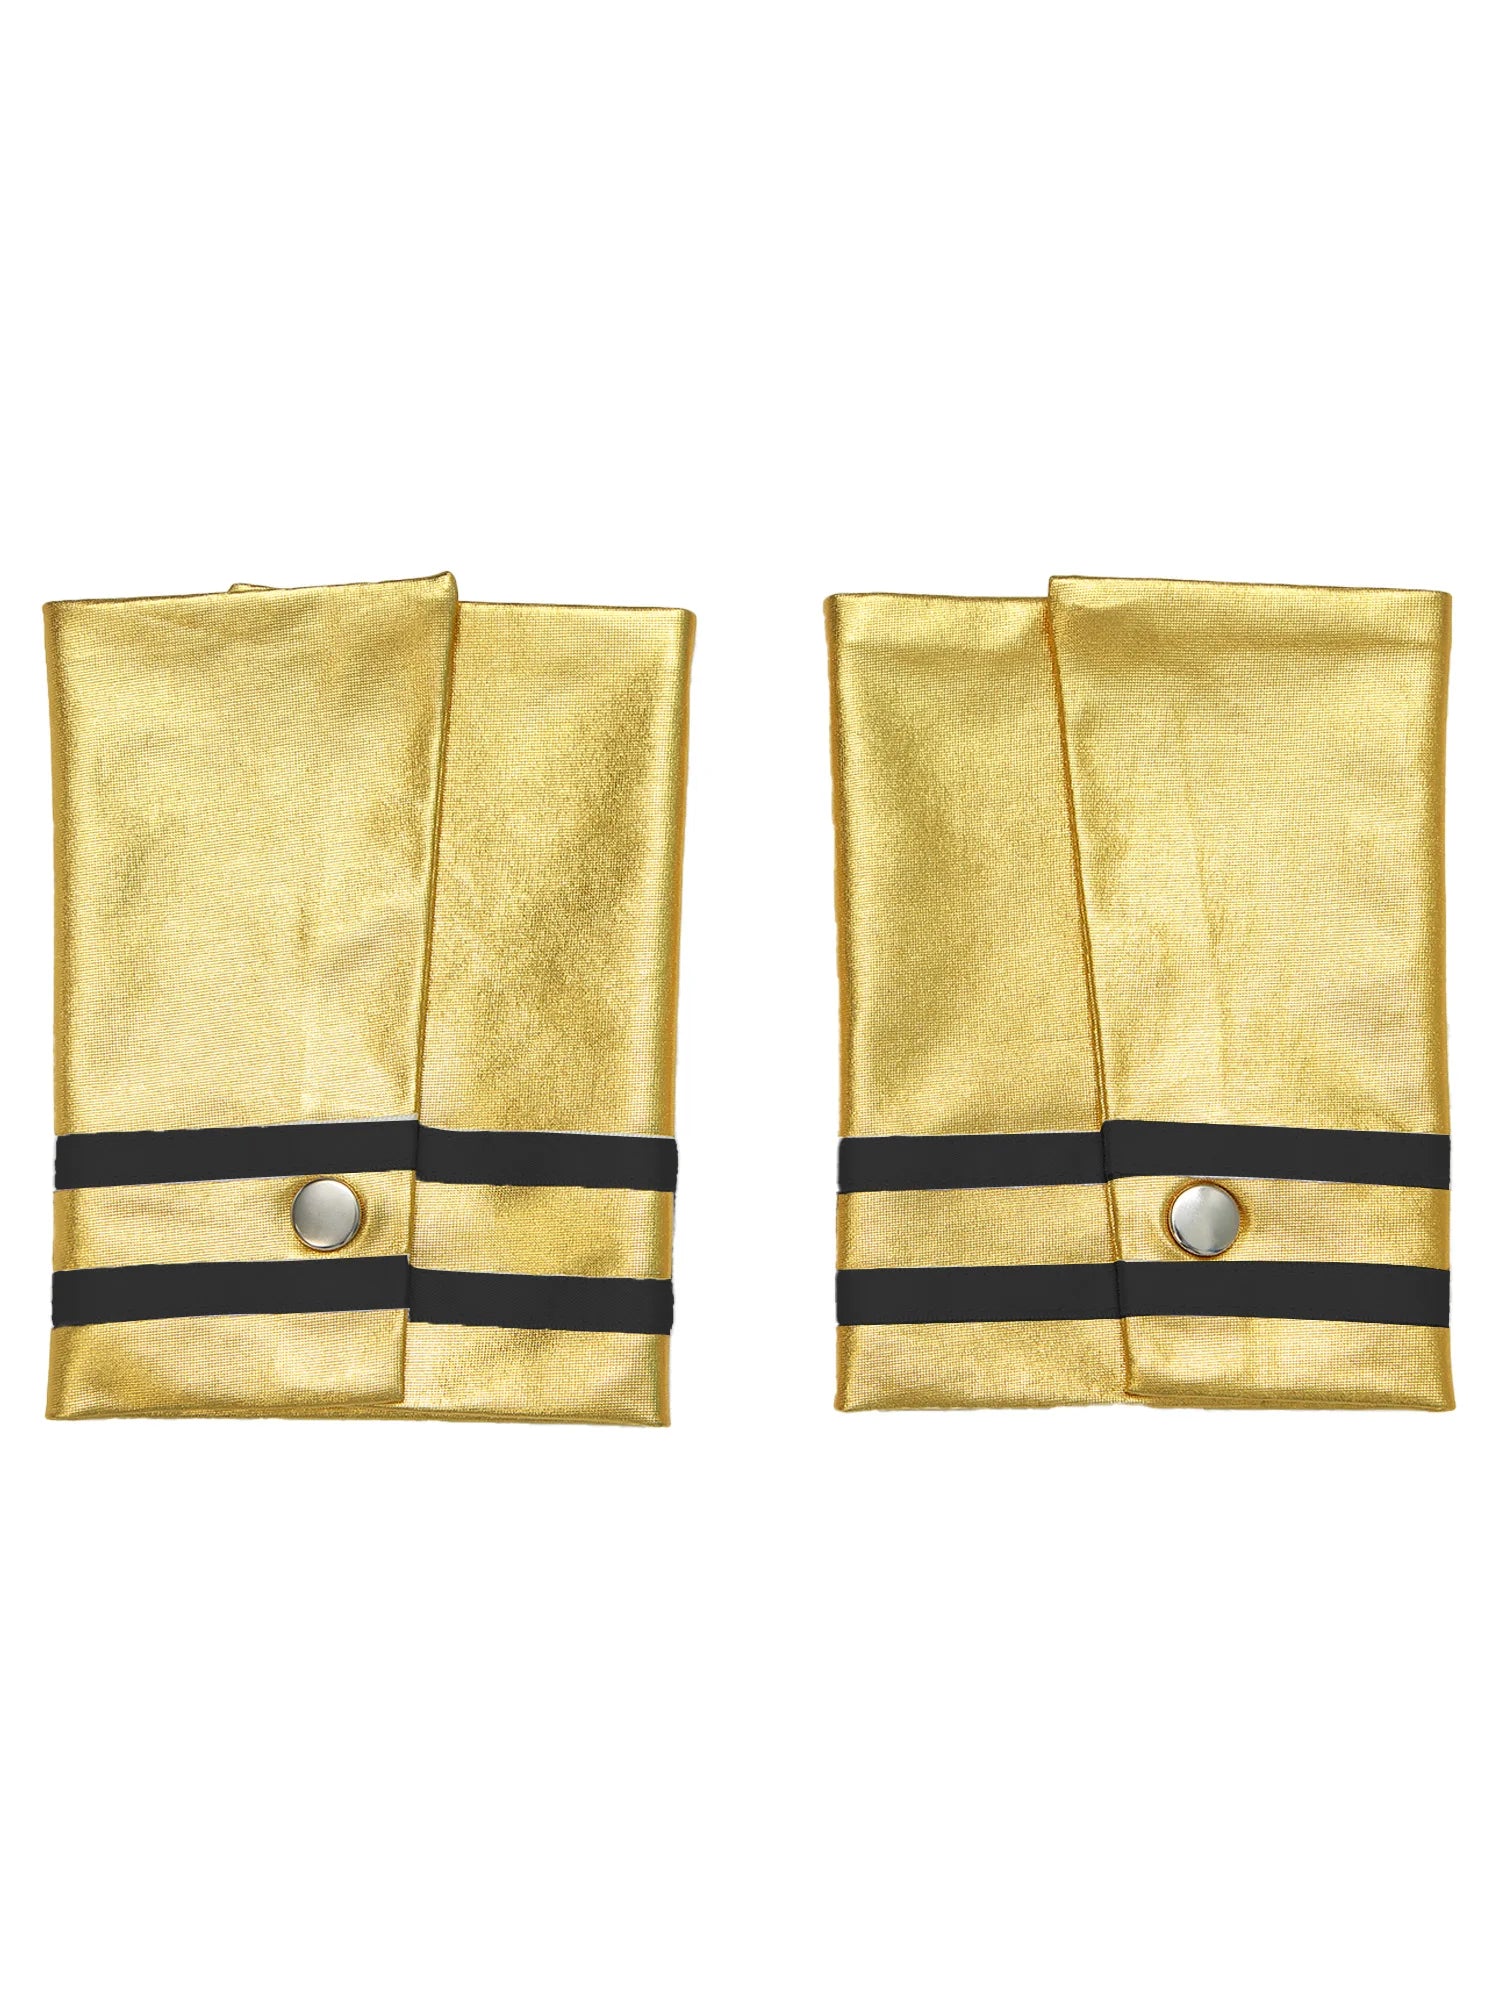 Two gold-colored fabric costume cuffs with black stripes and round silver buttons, designed to resemble pilot or military uniform accessories. Perfect for a Maramalive™ Adults Men's Ancient Egypt Costume Halloween Greek Roman Toga Cosplay Dress One Shoulder Strap Suspender Ruffle Skirt Dress Up, these cuffs add an authentic touch to your Movie & TV outfits.